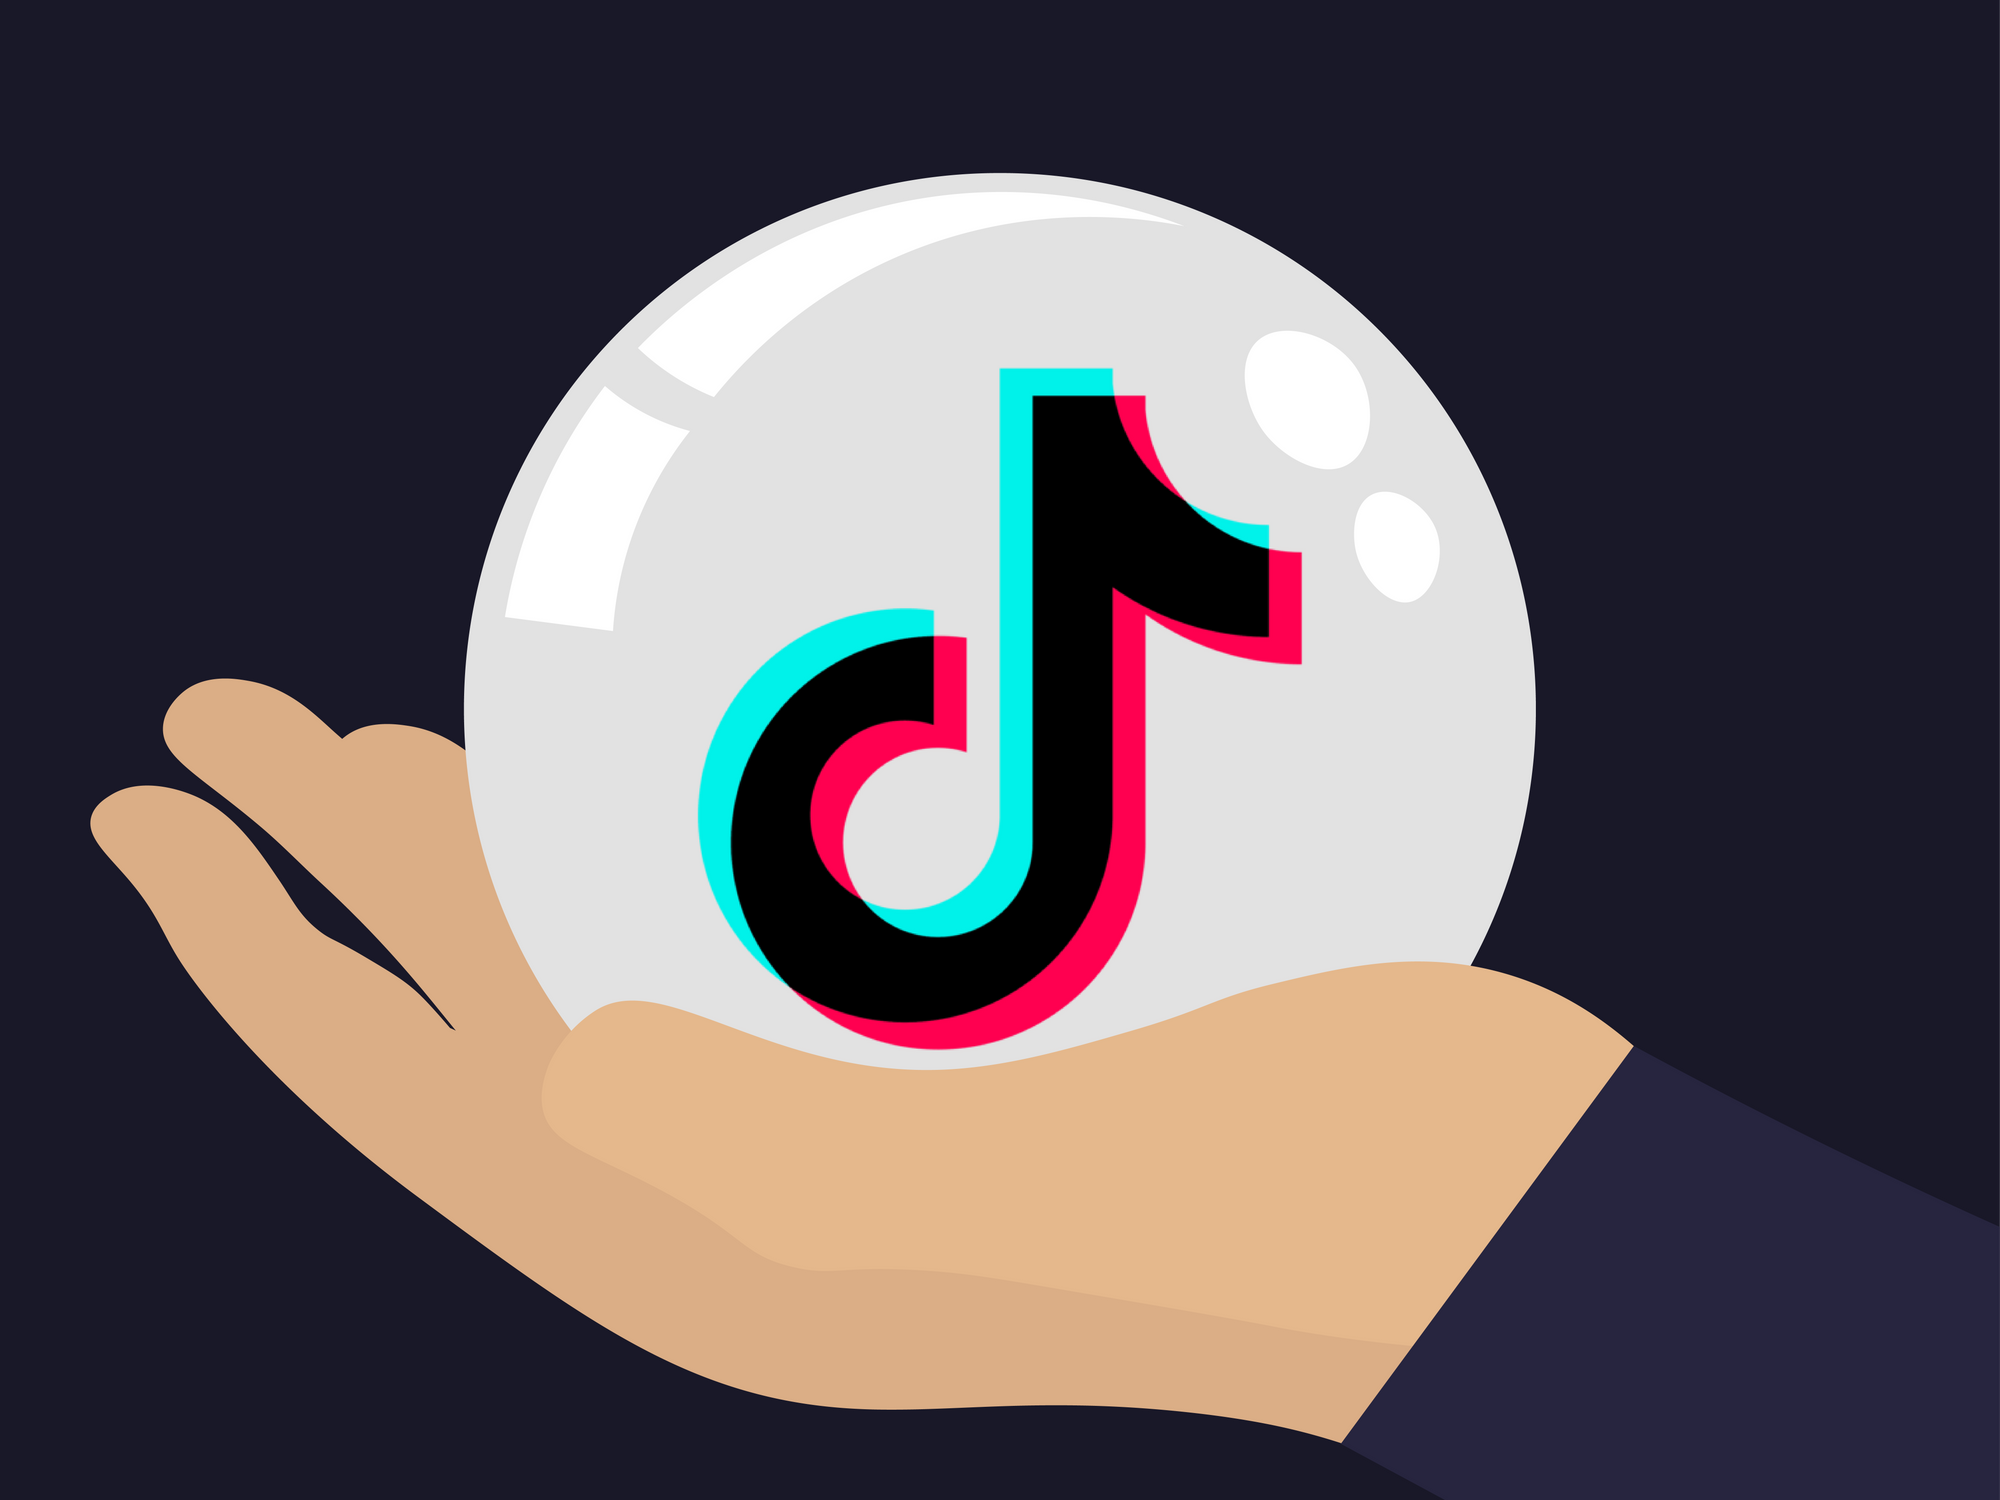 TikTok’s New 'Why This Video' Feature Doesn’t Provide the Transparency It Promised